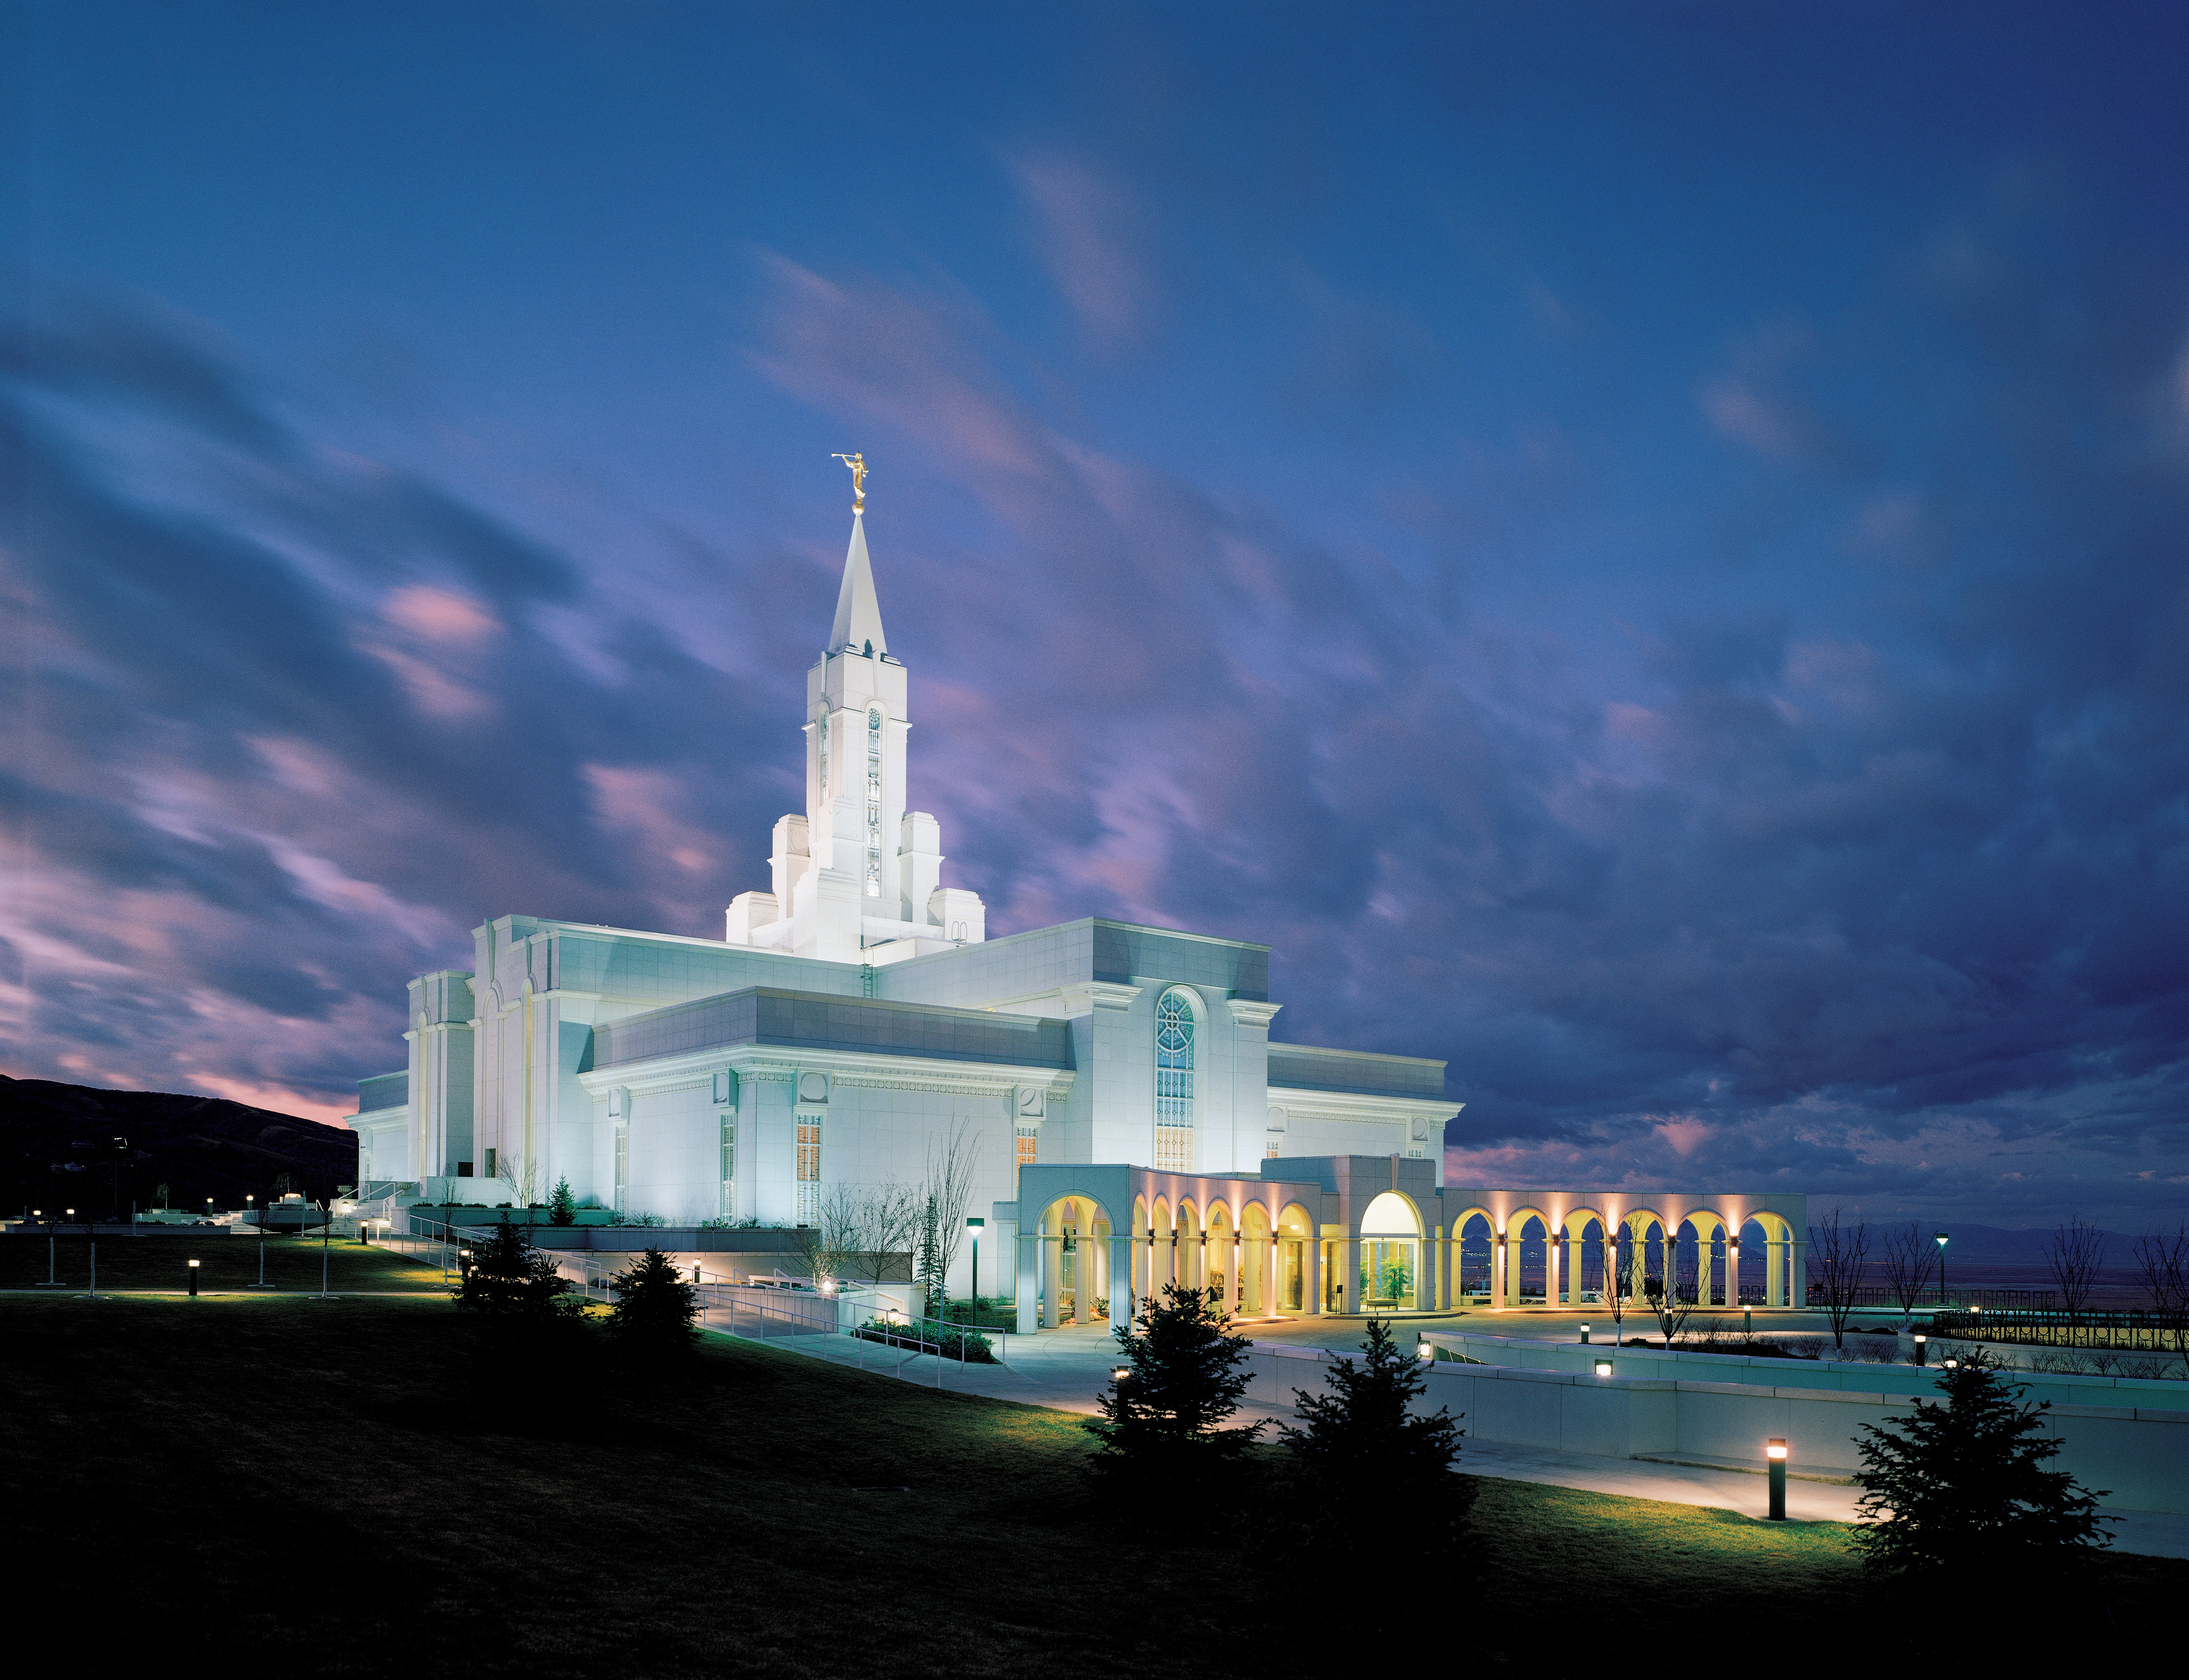 The Bountiful Utah Temple lit up in the evening, with clouds in the sky.